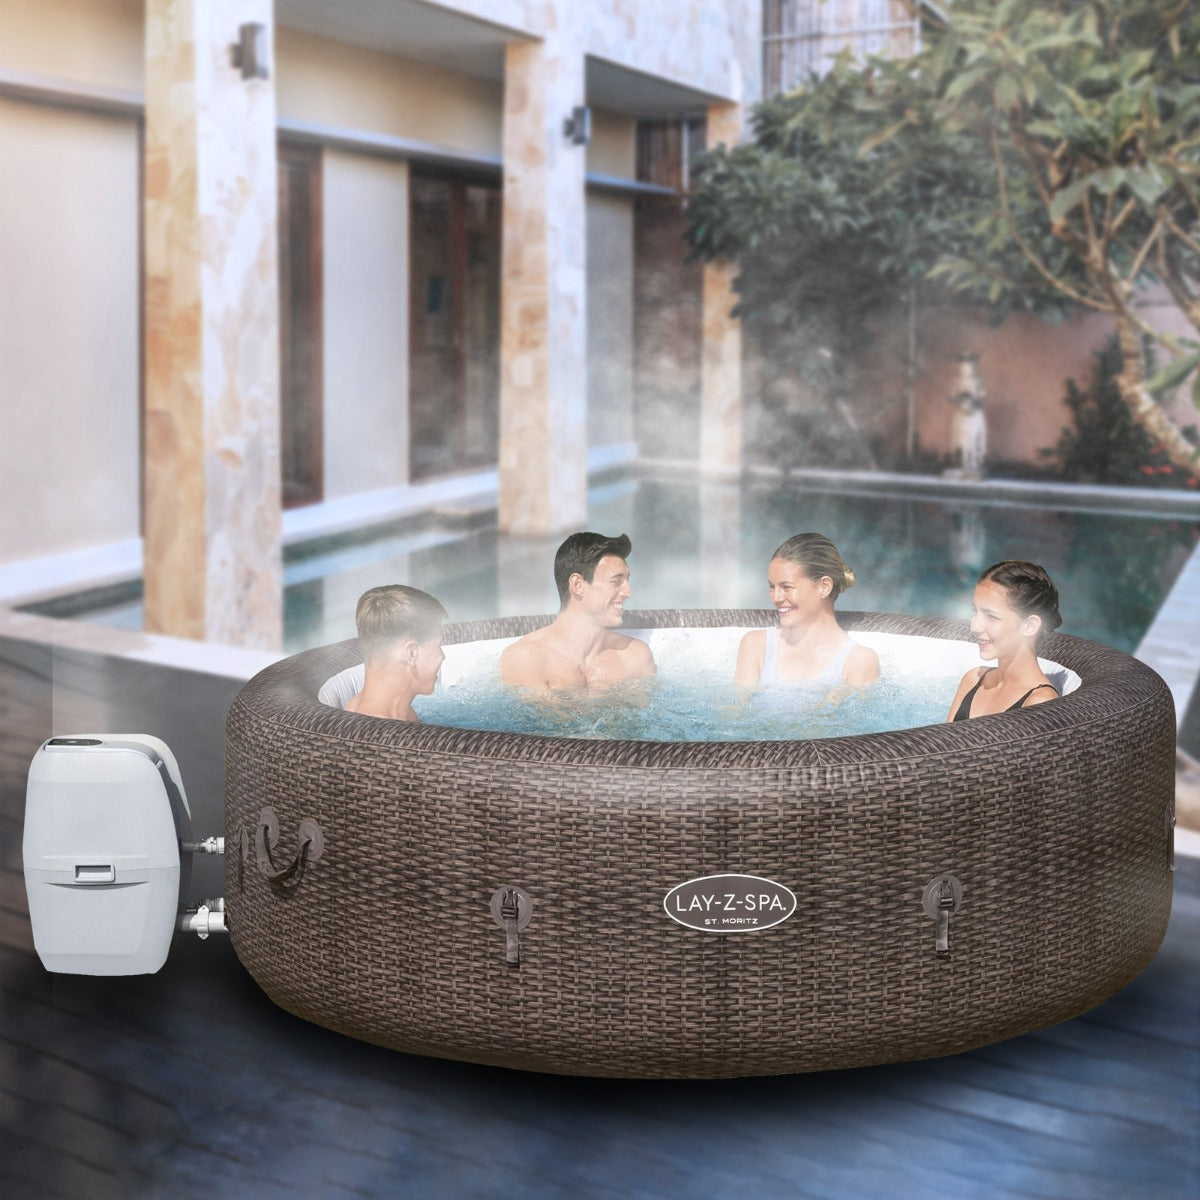 Gigantic! Bestway Lay Z Spa St. Moritz Heated Hot Tub | Outbax